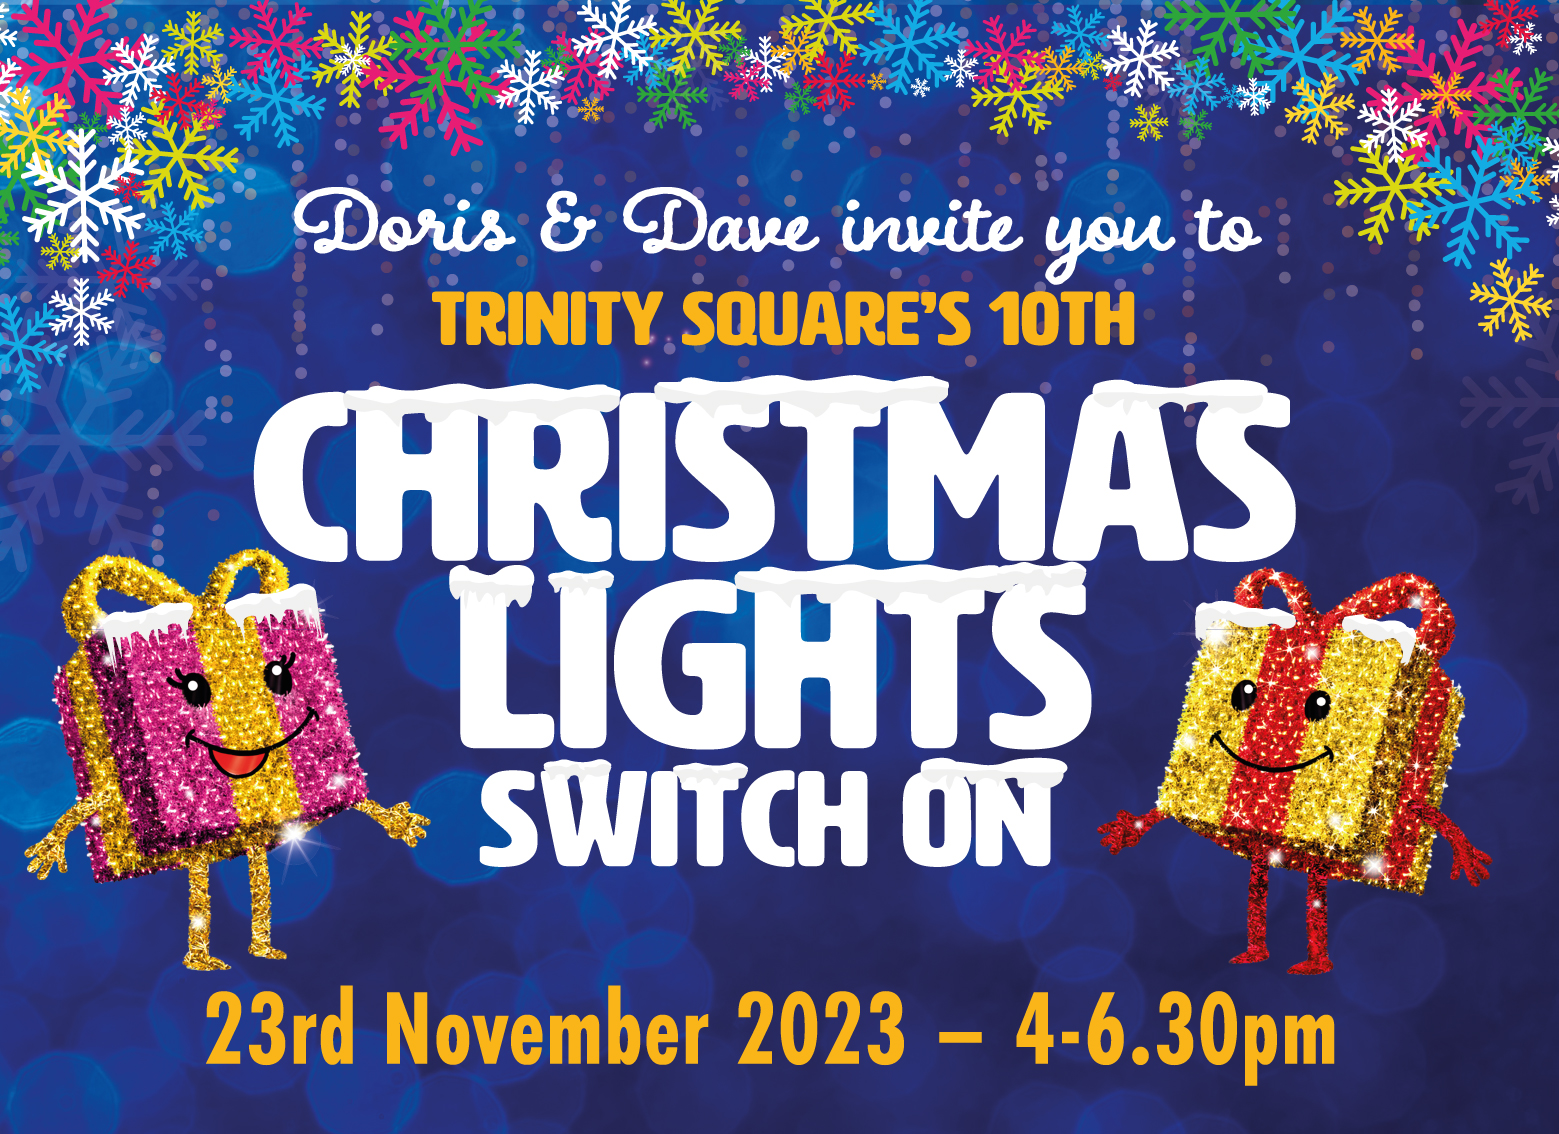 JOIN US FOR OUR 2023 CHRISTMAS LIGHT SWITCH ON